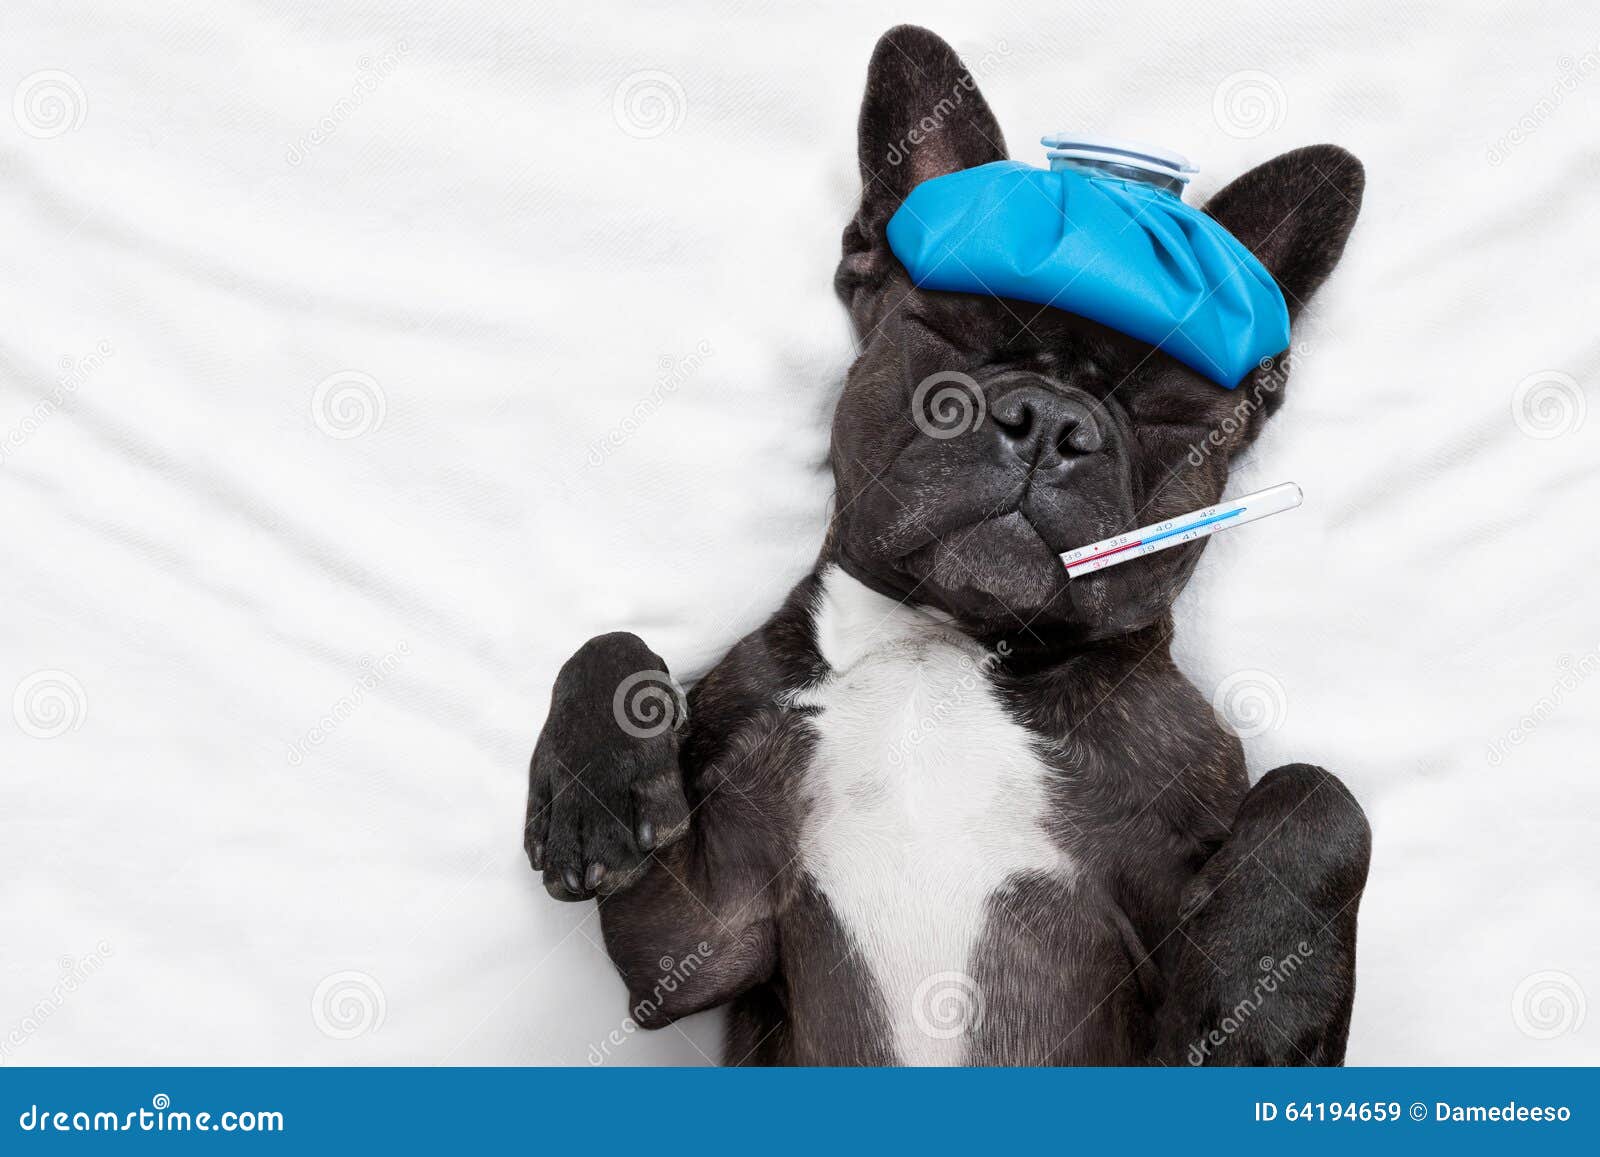 Image Result For French Bulldog In Bed